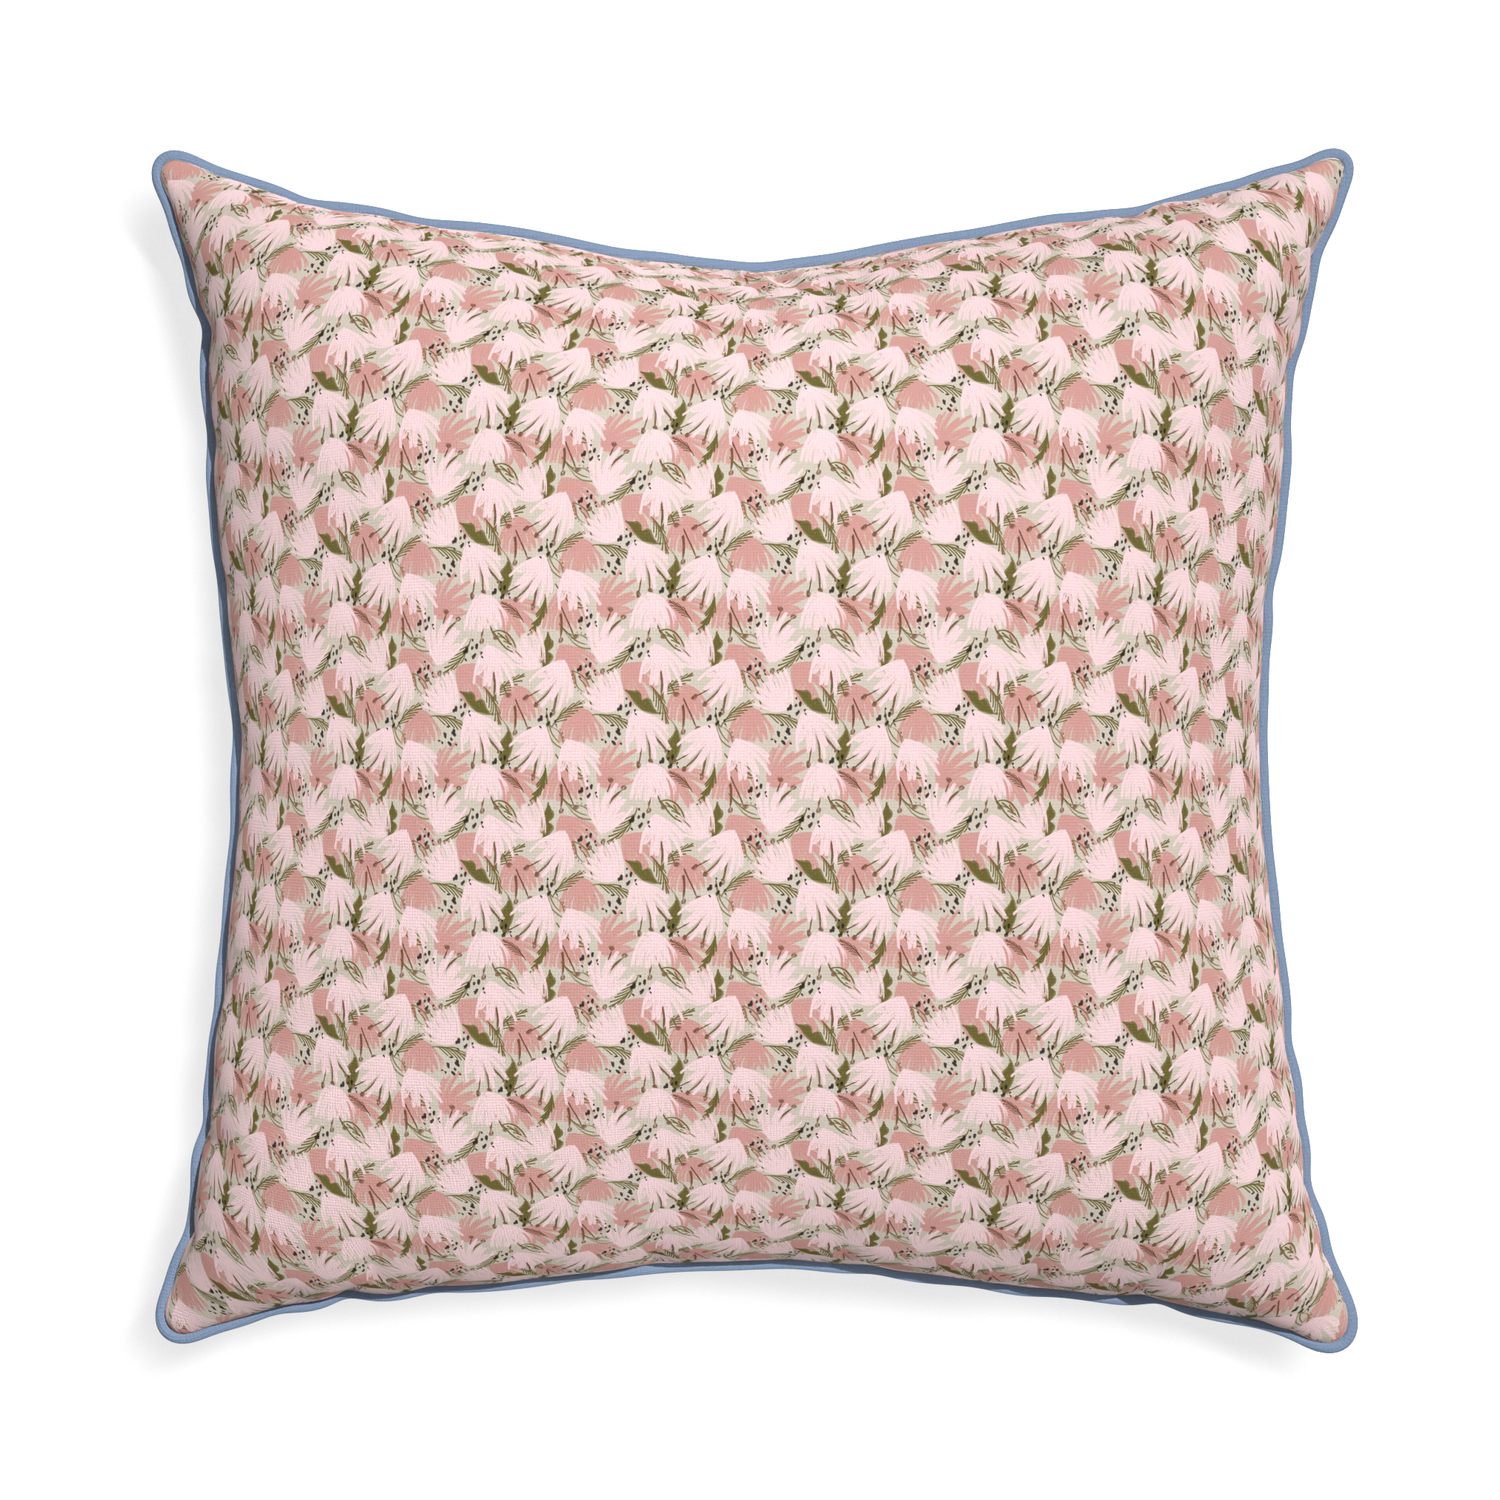 Euro-sham eden pink custom pink floralpillow with sky piping on white background